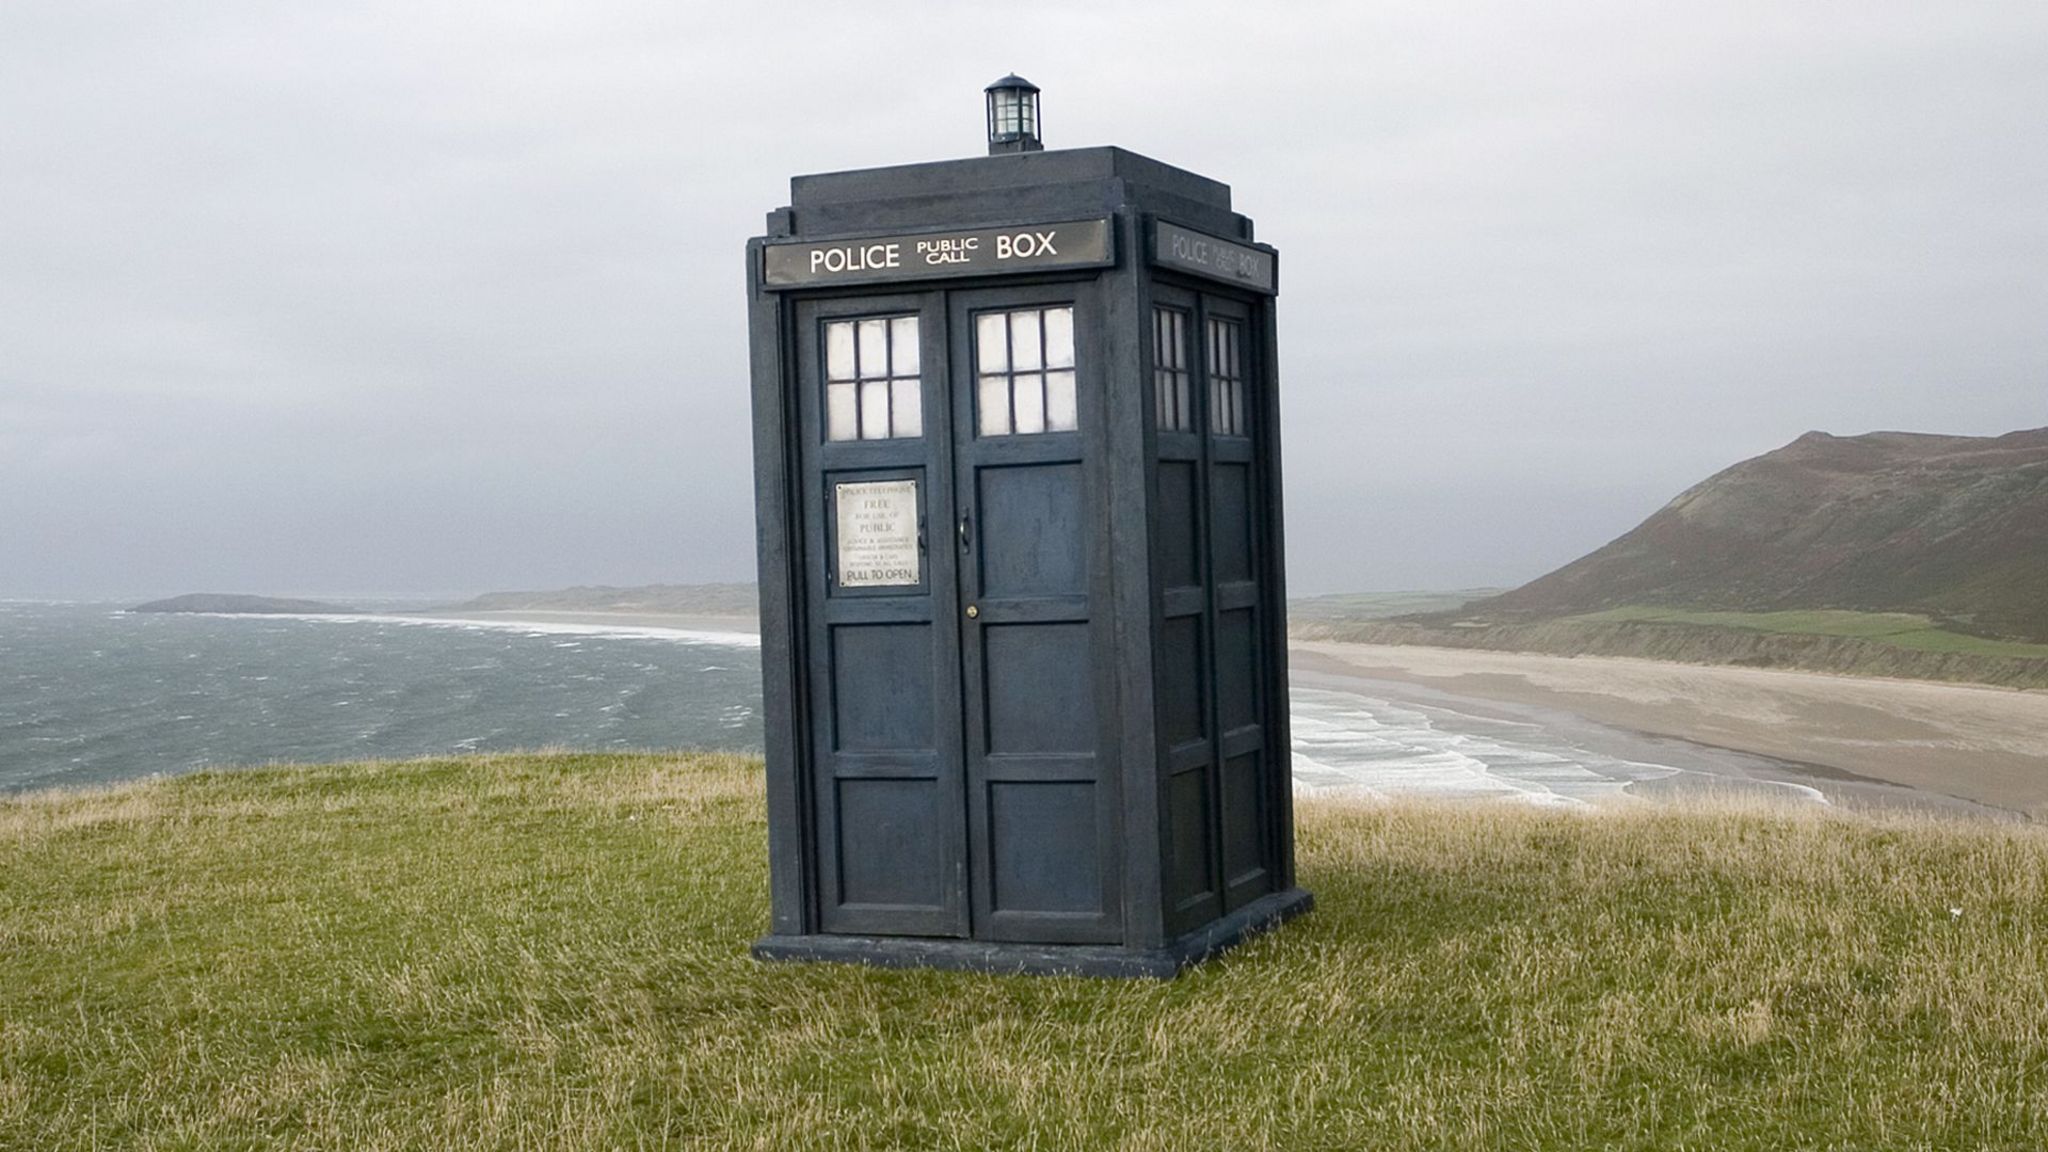 The TARDIS on a grassy hill overlooking the sea
© BBC